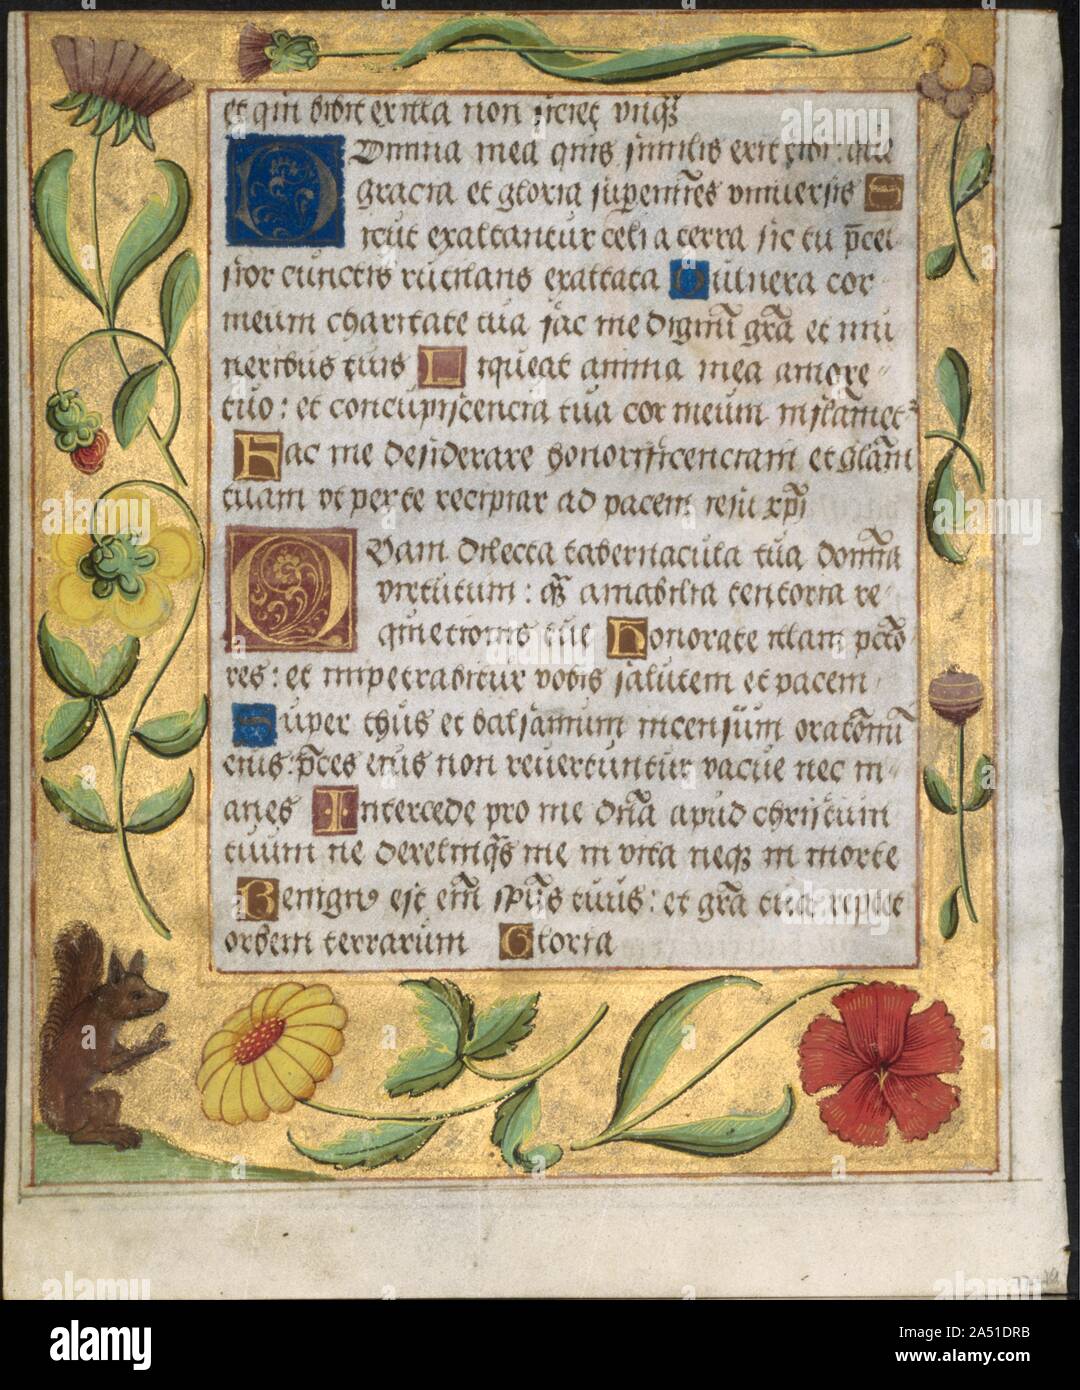 Leaf from a Psalter and Prayerbook: Ornamental Border with Flowers and Squirrel (verso), c. 1524. These three leaves represent the charming, intricate decoration found throughout the parent volume, its leaves now dispersed. Virtually every border, recto and verso, was decorated with liquid gold and highlighted with a variety of flowers, fruits, and vegetables&#x2014;carnations, thistles, roses, violets, peas, melons&#x2014;as well as cornucopias, satyrs, masks, insects, birds, etc. The decoration is particularly charming because of the little vignettes within the borders. These motifs depict a Stock Photo